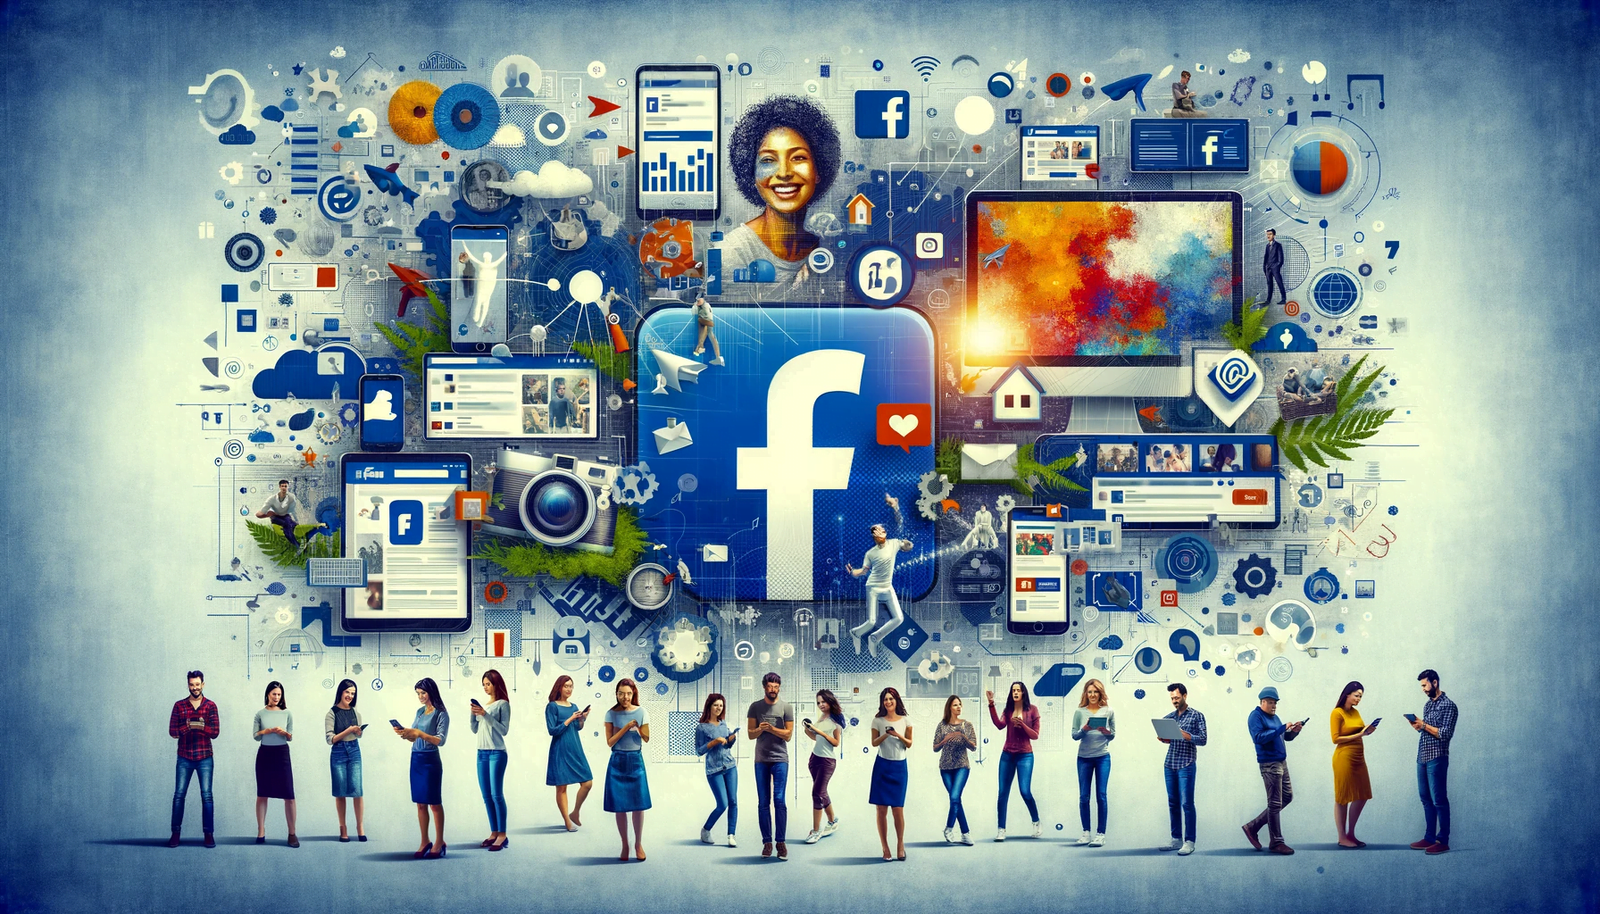 Diverse audience engaging with Facebook on various devices and a creative Facebook ad, symbolizing Facebook's wide reach and innovative advertising in digital marketing.